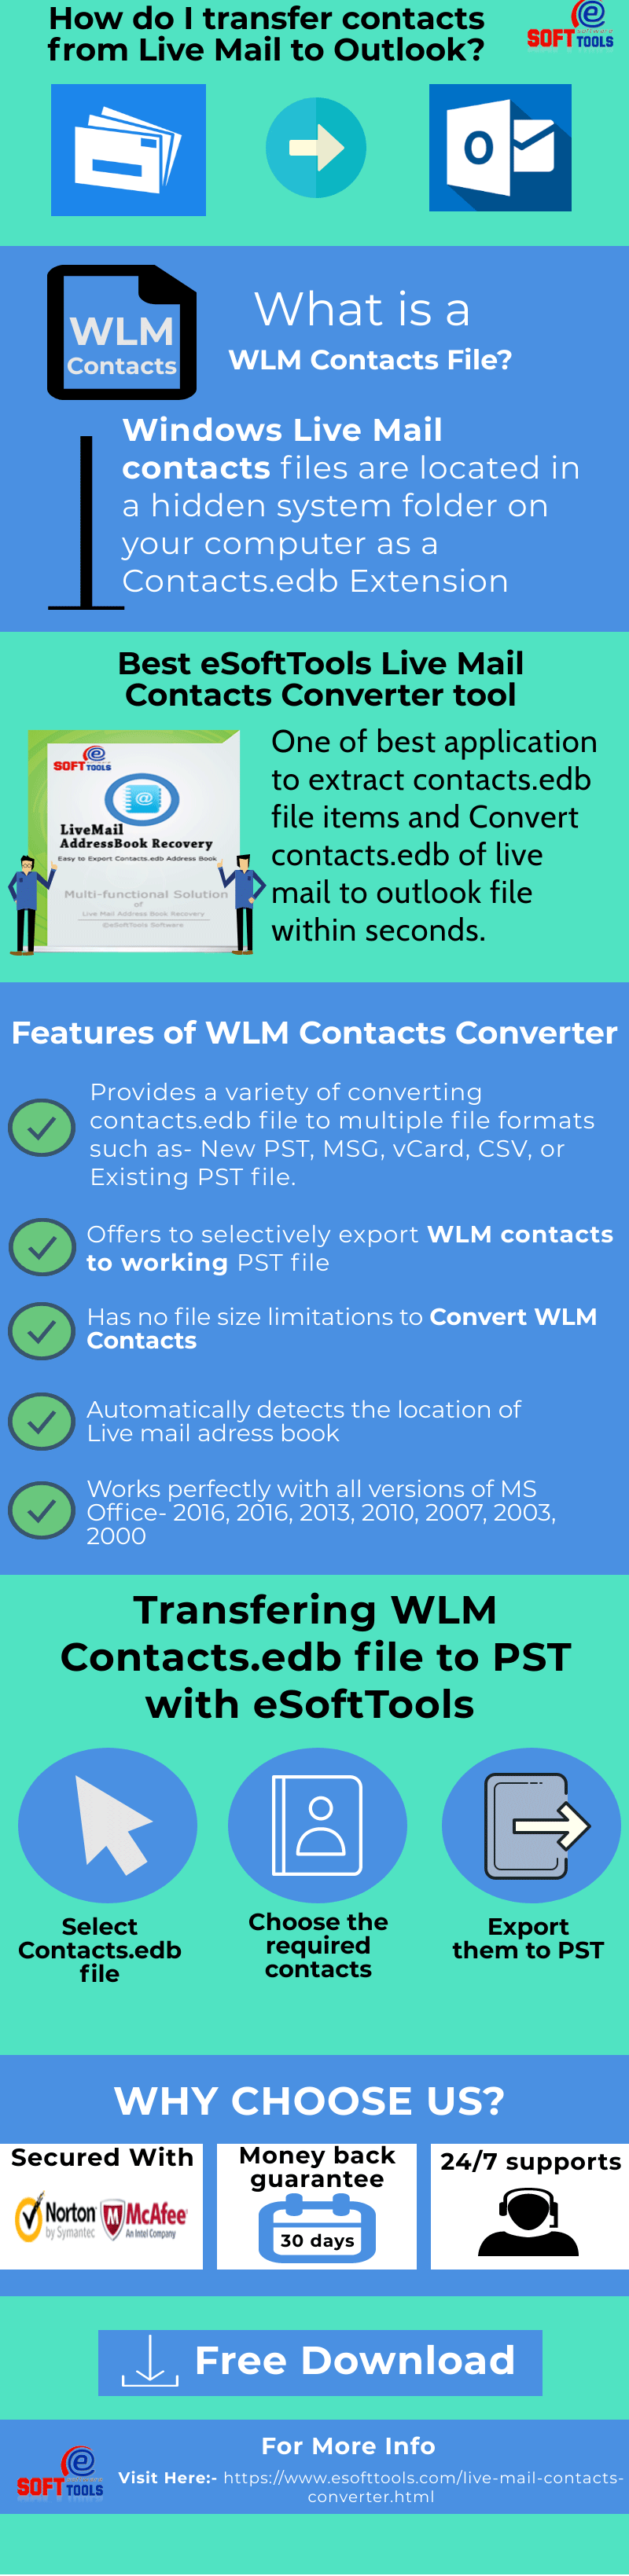 transfer-contacts-wlm-to-outlook.png